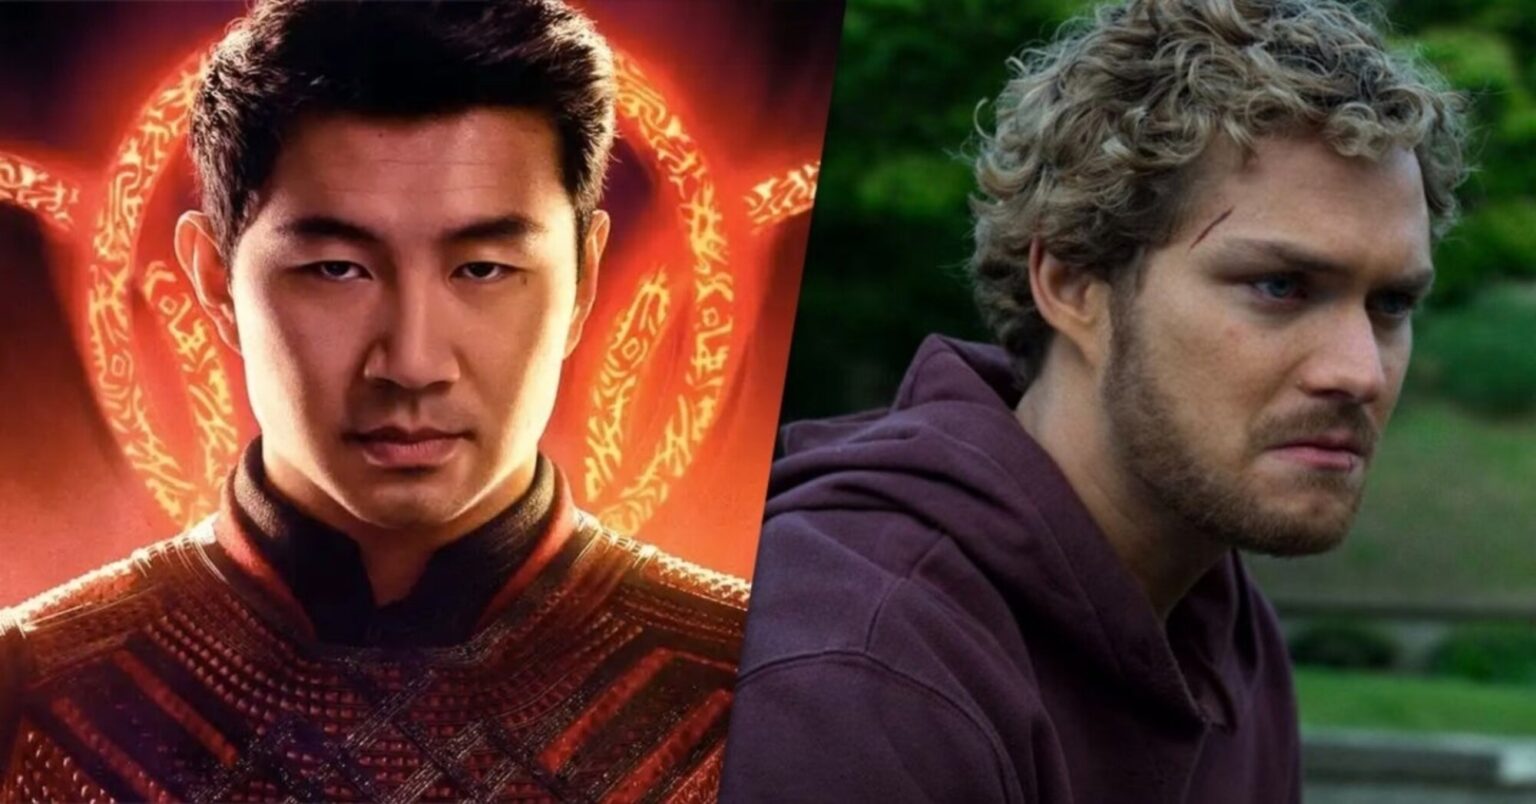 Now that Shang-Chi is expected to hit the big screen this year, could Iron Fist make a comeback as well after the failed Netflix show? Find out here.